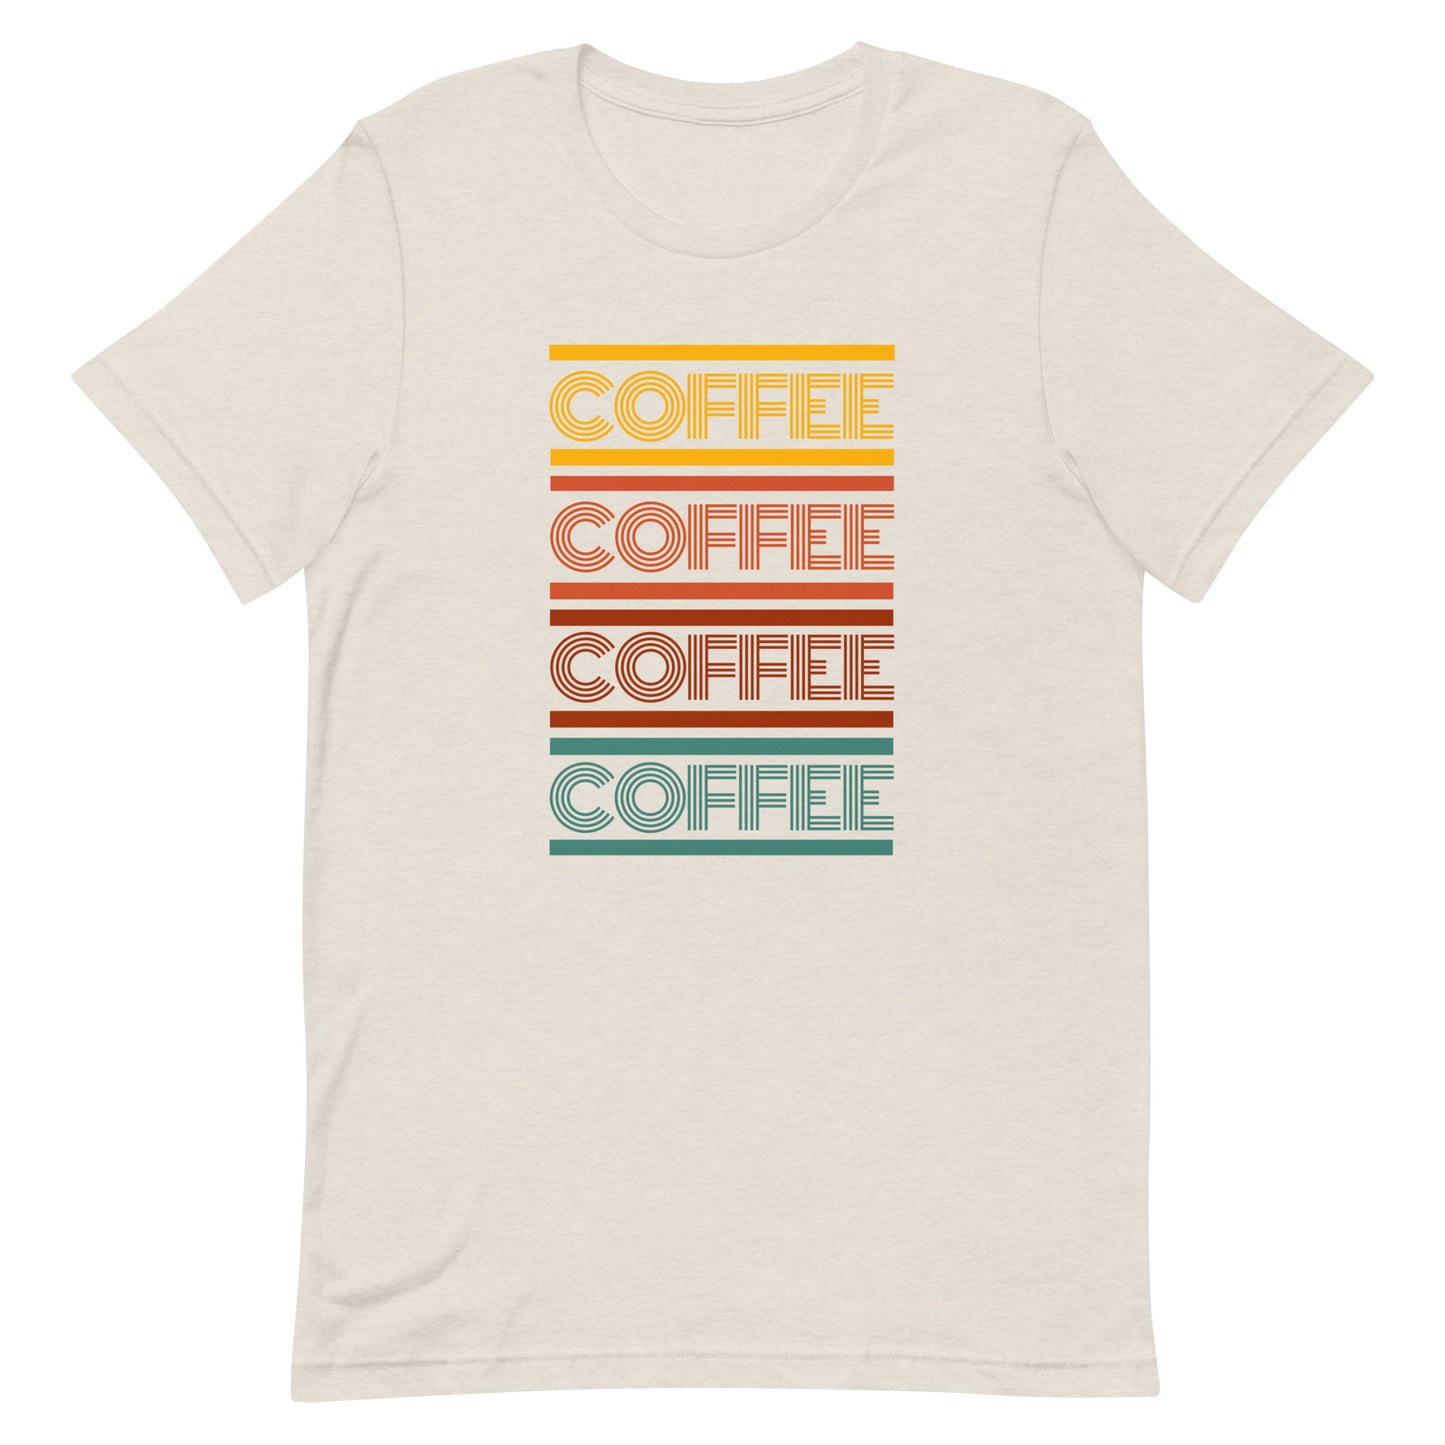 A heather dust coffee t-shirt that has the words coffee repeated in a retro inspired font.